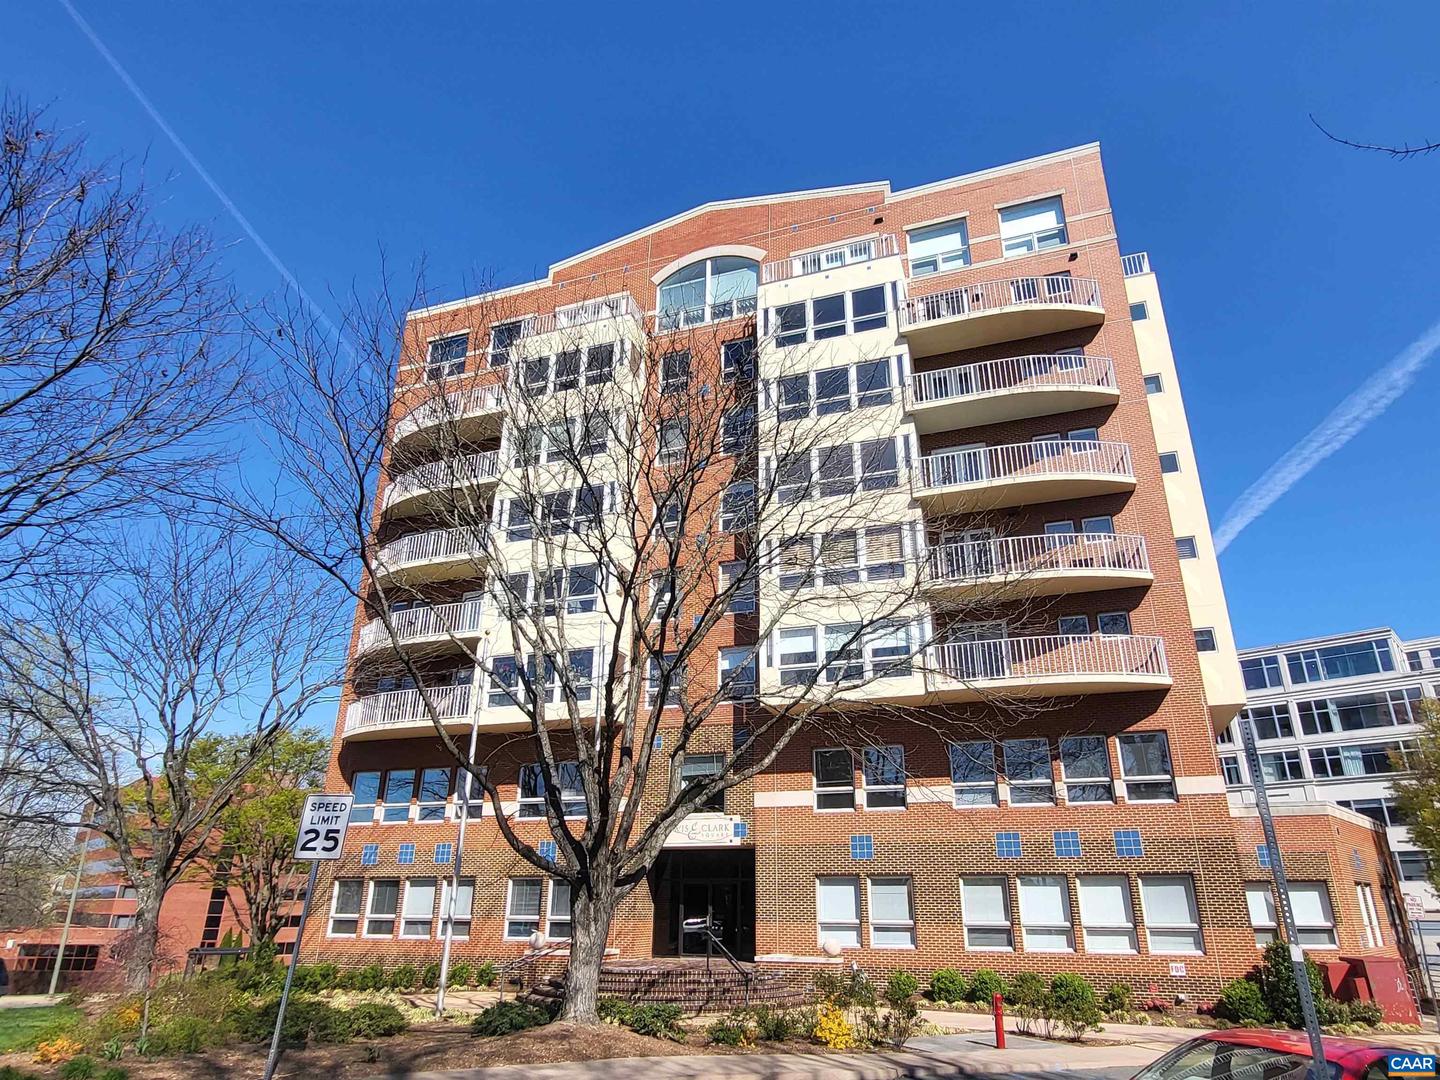 250 W MAIN ST #602, CHARLOTTESVILLE, Virginia 22902, 2 Bedrooms Bedrooms, ,2 BathroomsBathrooms,Residential,For sale,250 W MAIN ST #602,651131 MLS # 651131